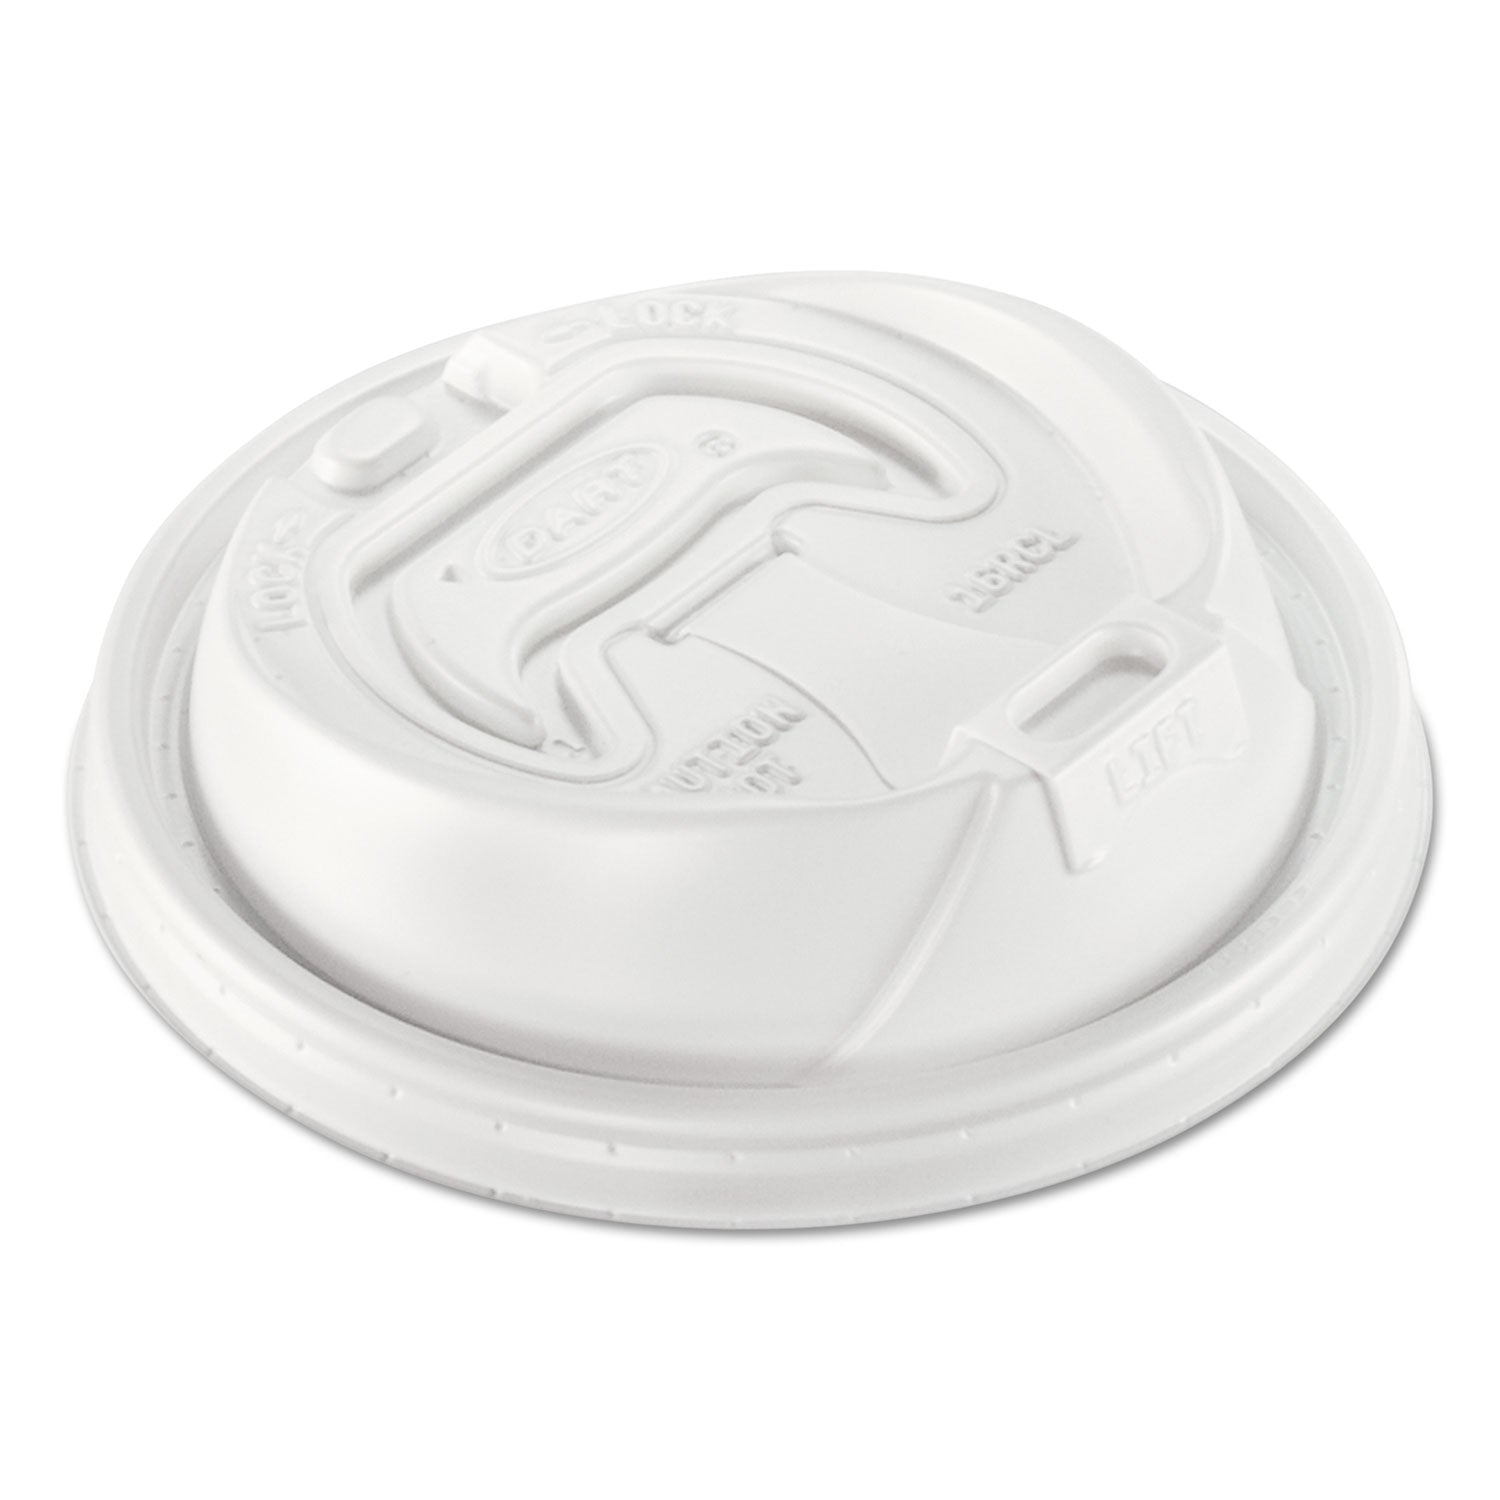 Optima Reclosable Lid, Fits 12 oz to 24 oz Foam Cups, White, 100/Pack - 